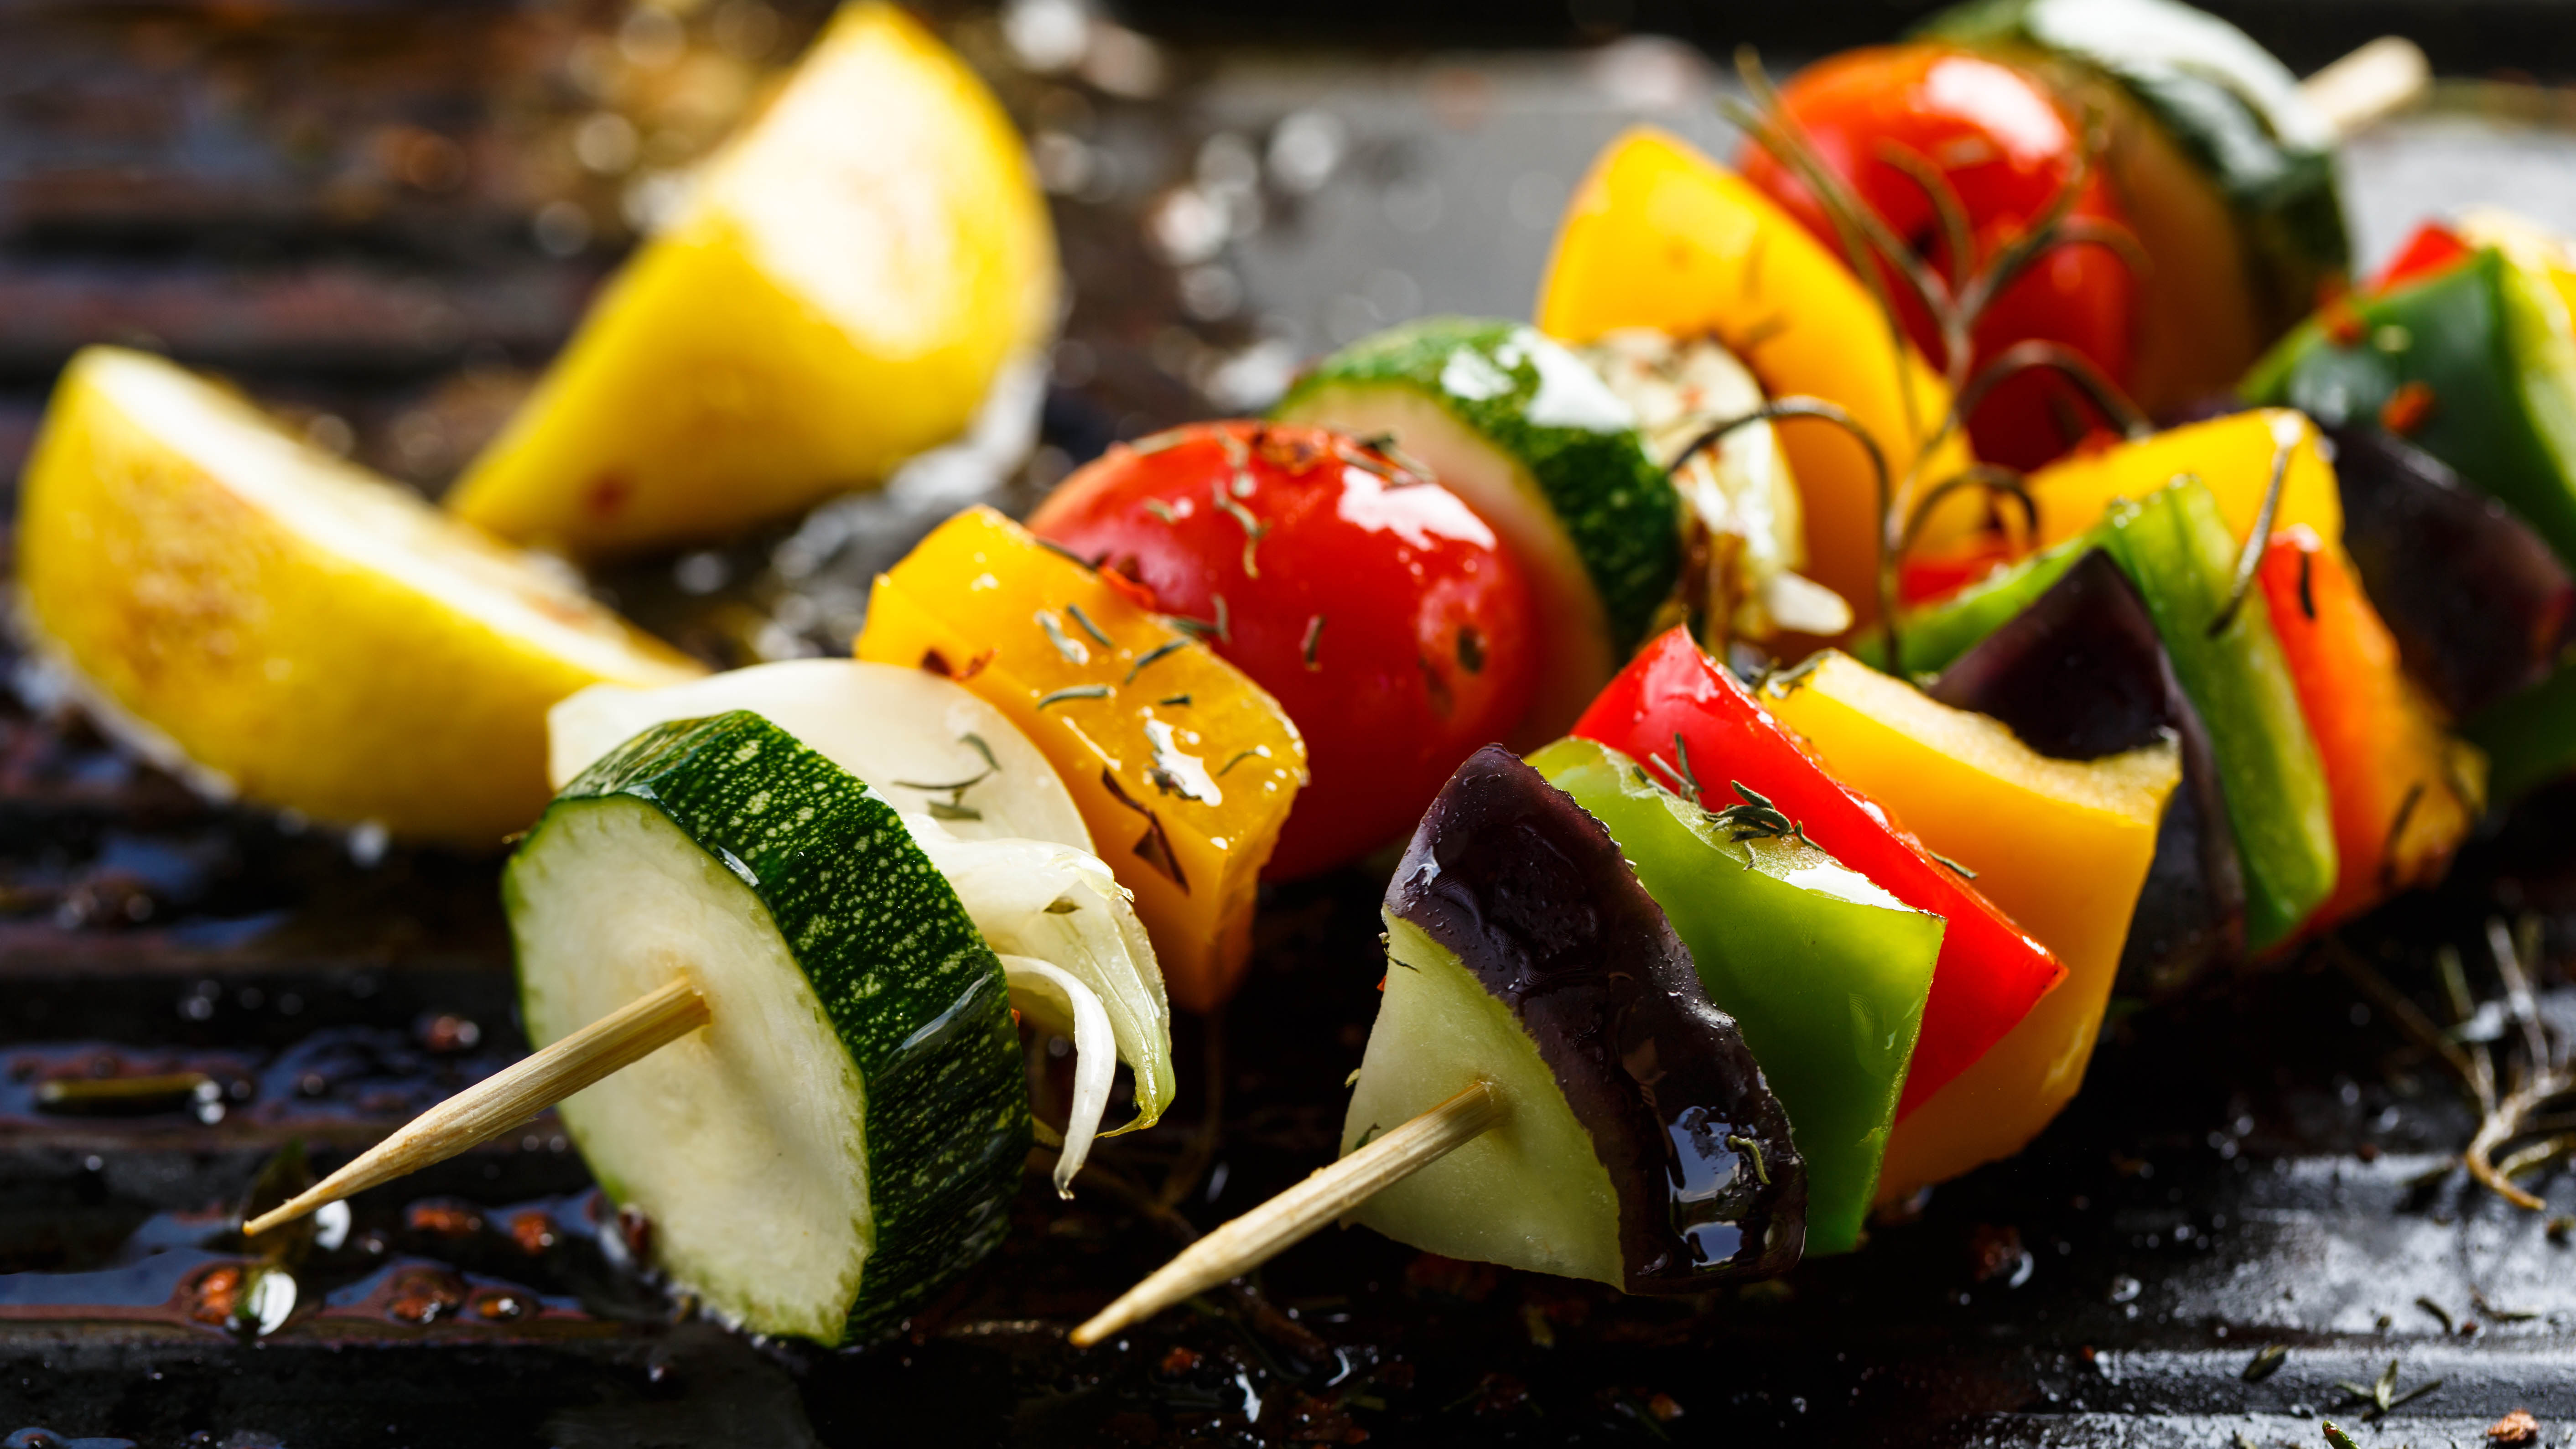 Vegetable skewers on the grill